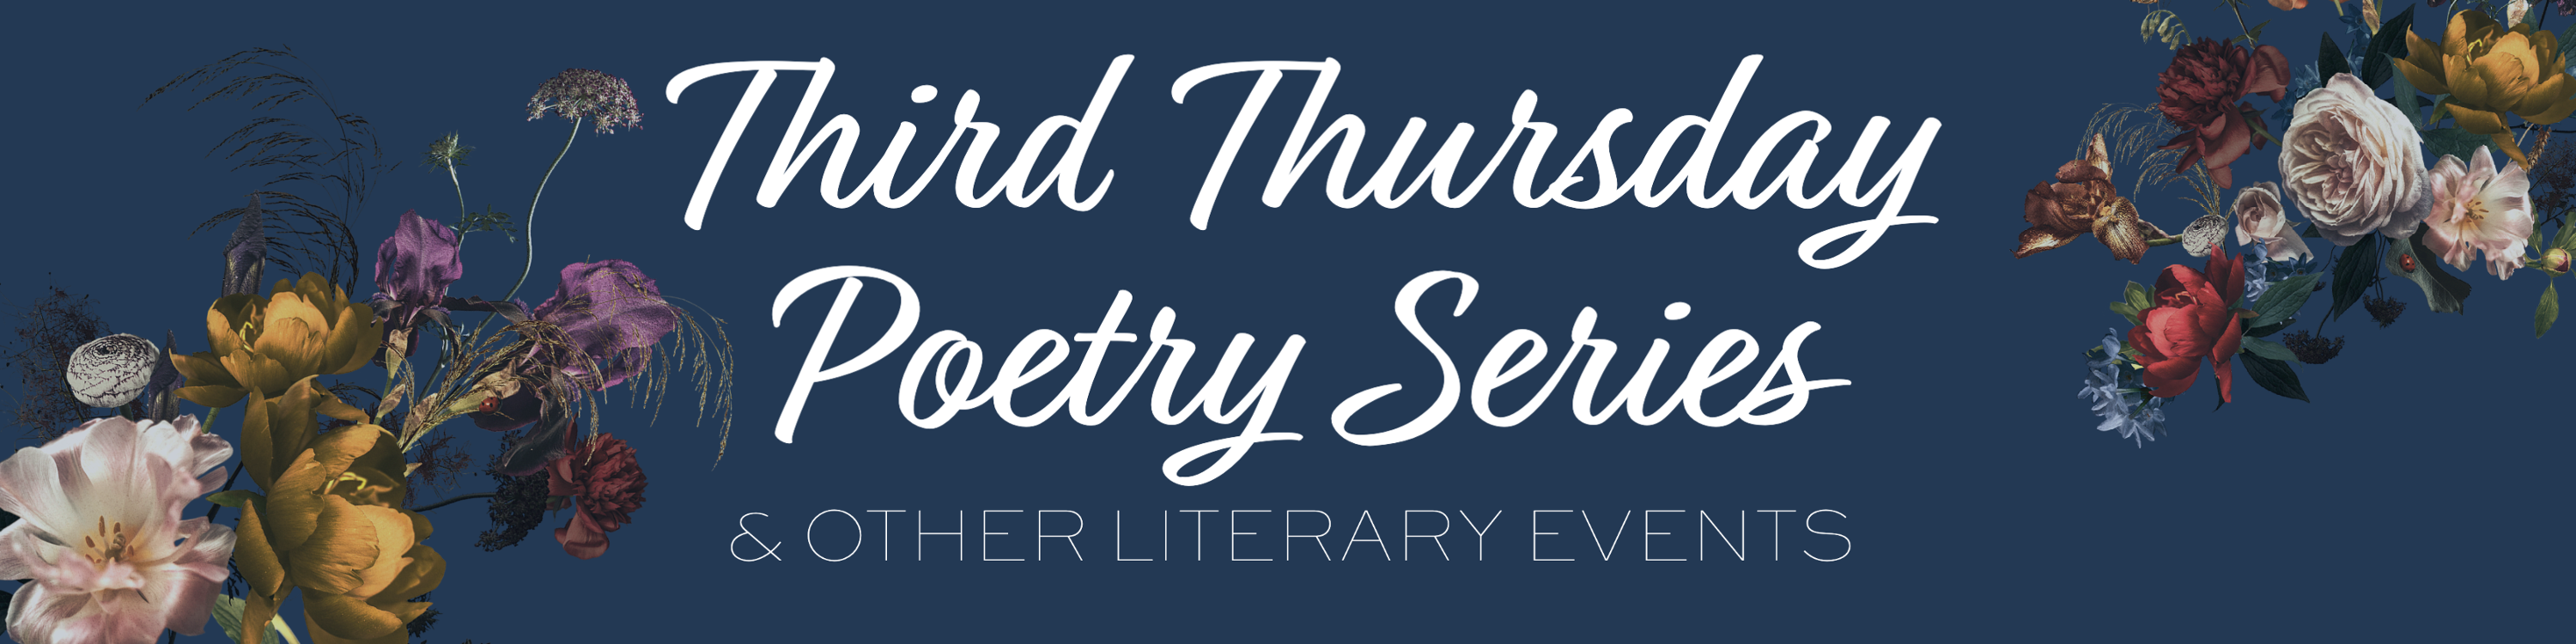 Third Thursday Poetry Series and Other Literary Events